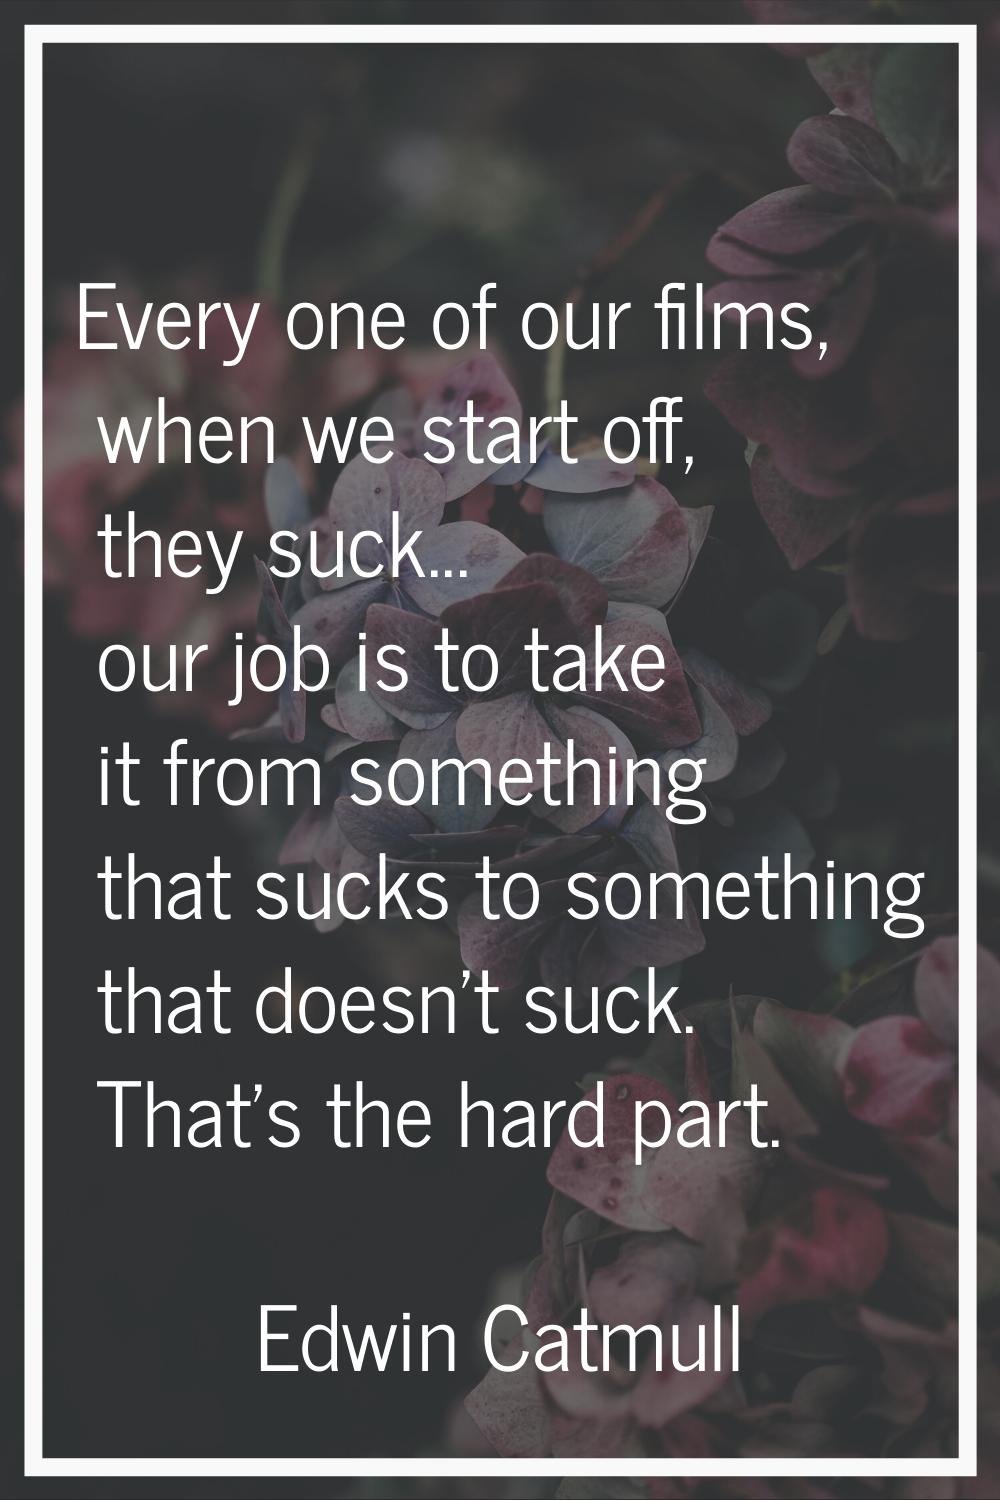 Every one of our films, when we start off, they suck... our job is to take it from something that s